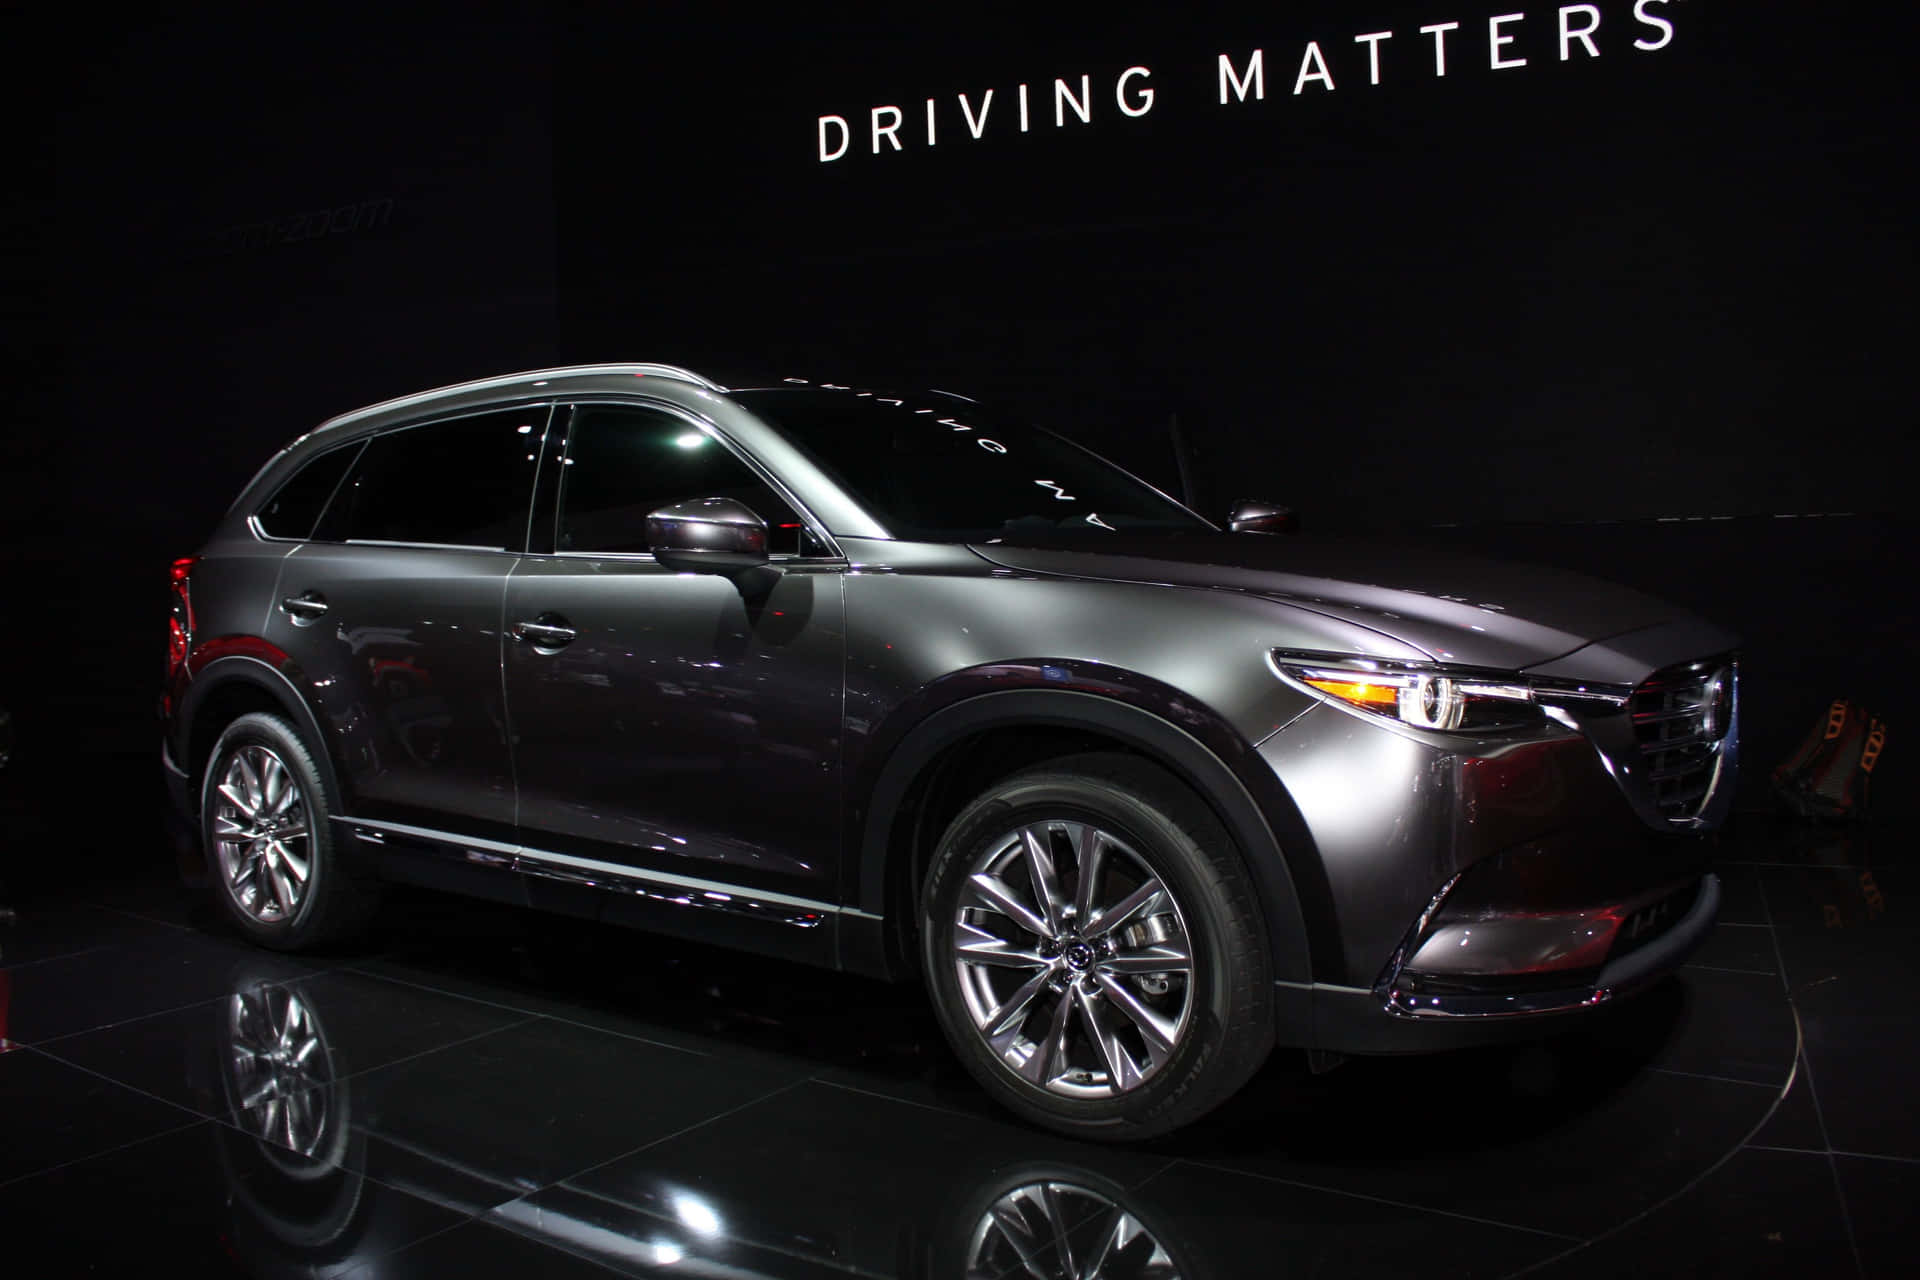 Stunning Silver Mazda CX-9 on the Road Wallpaper